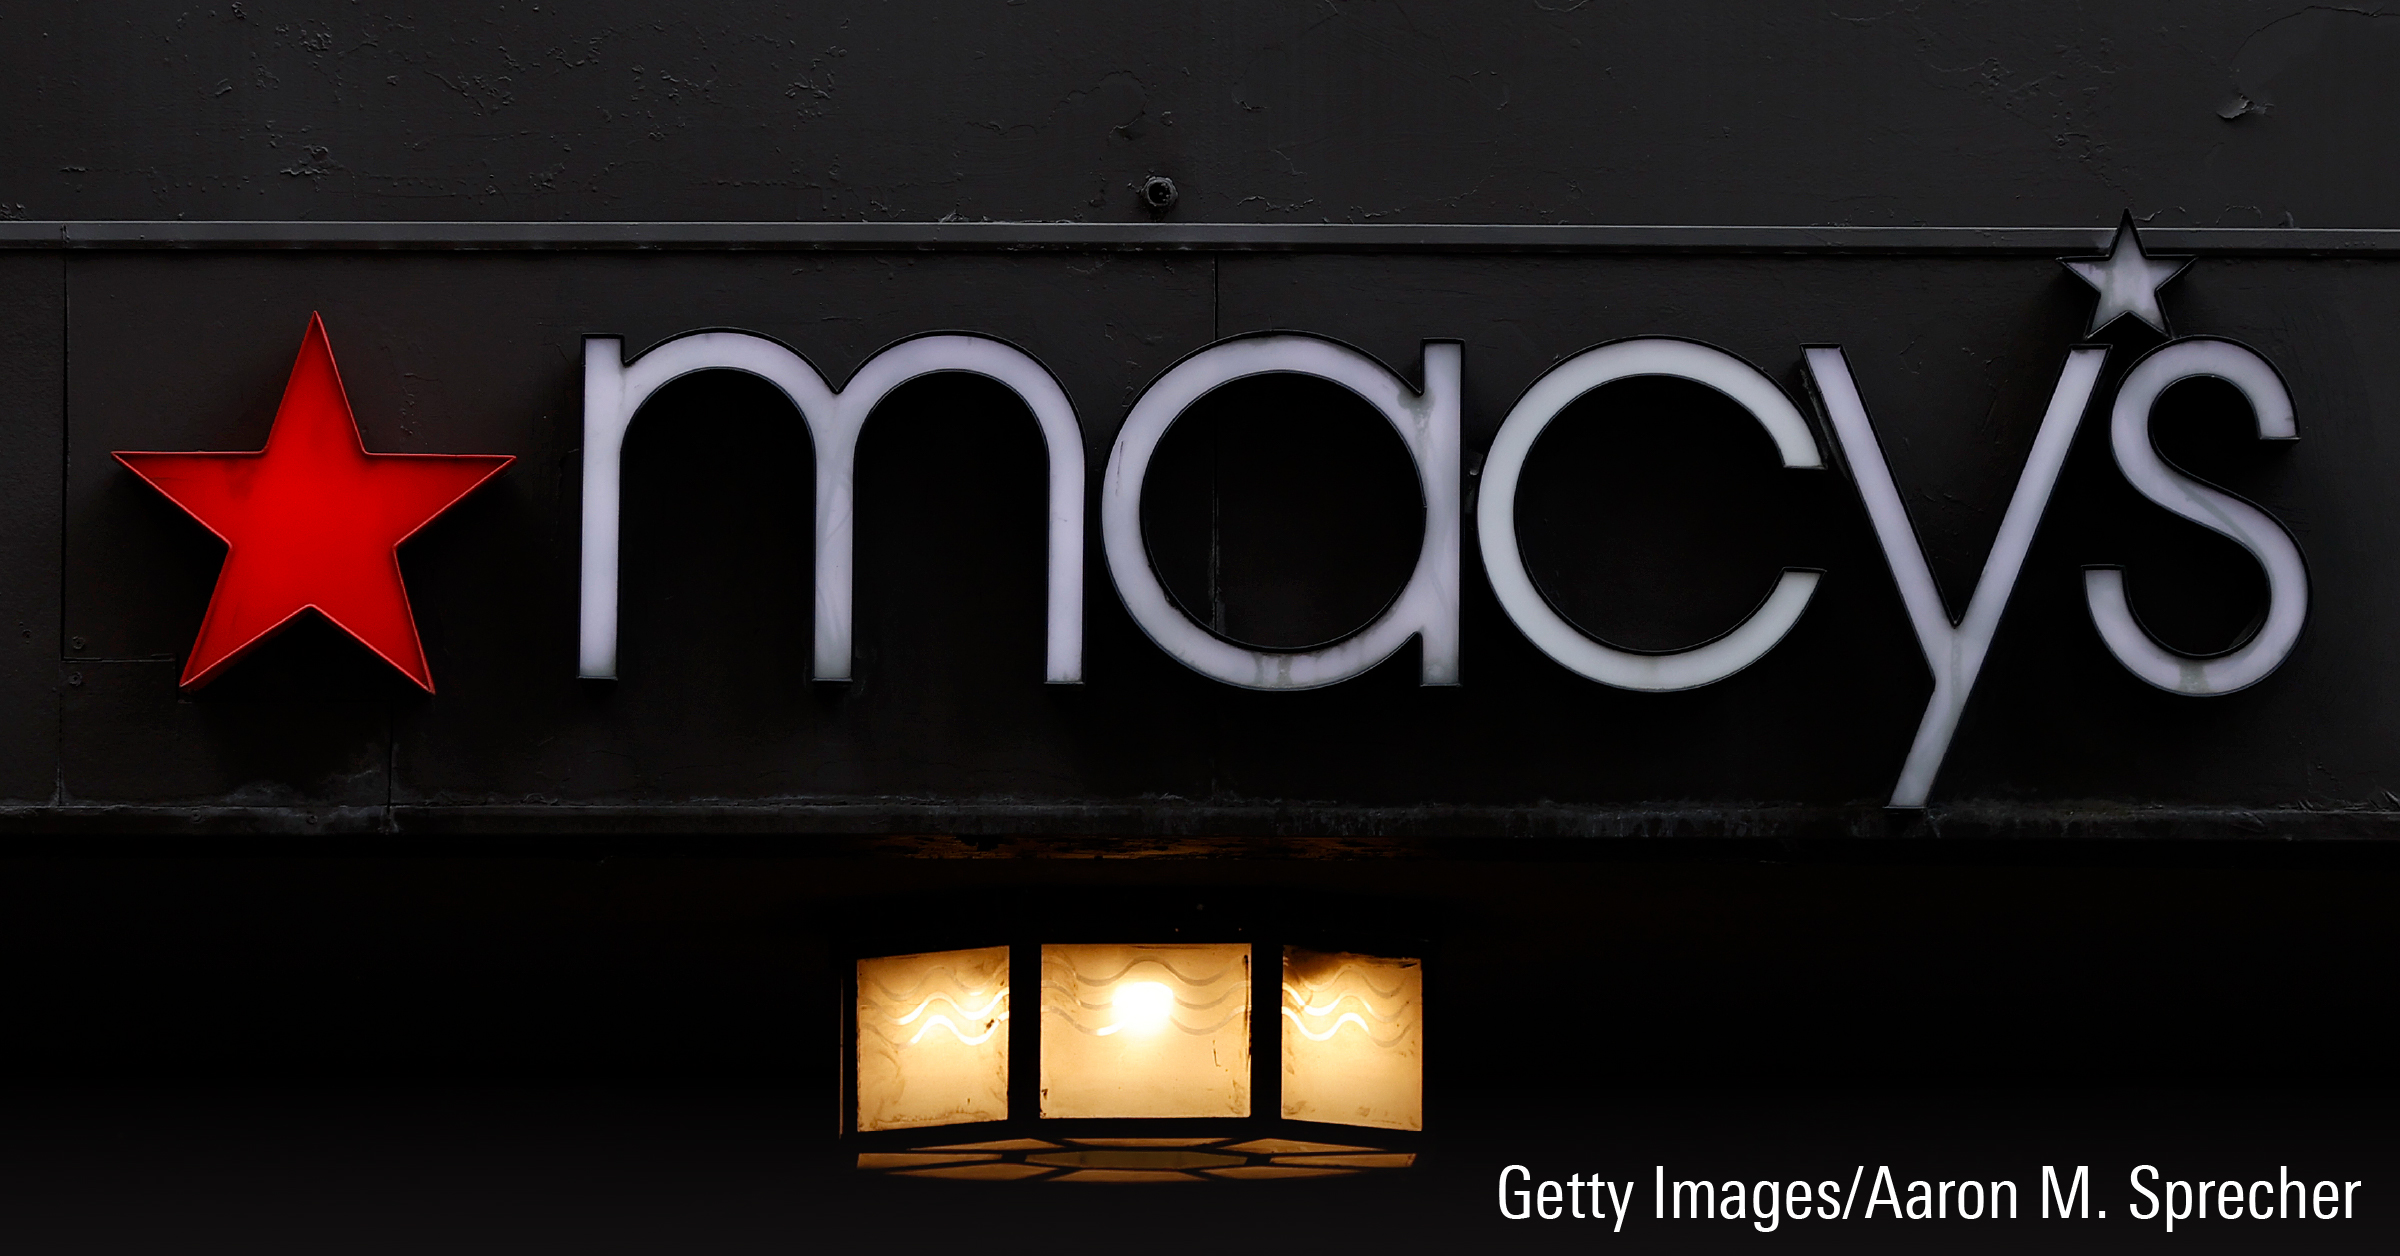 The Macy's logo and signage is displayed outside the Herald Square department store.